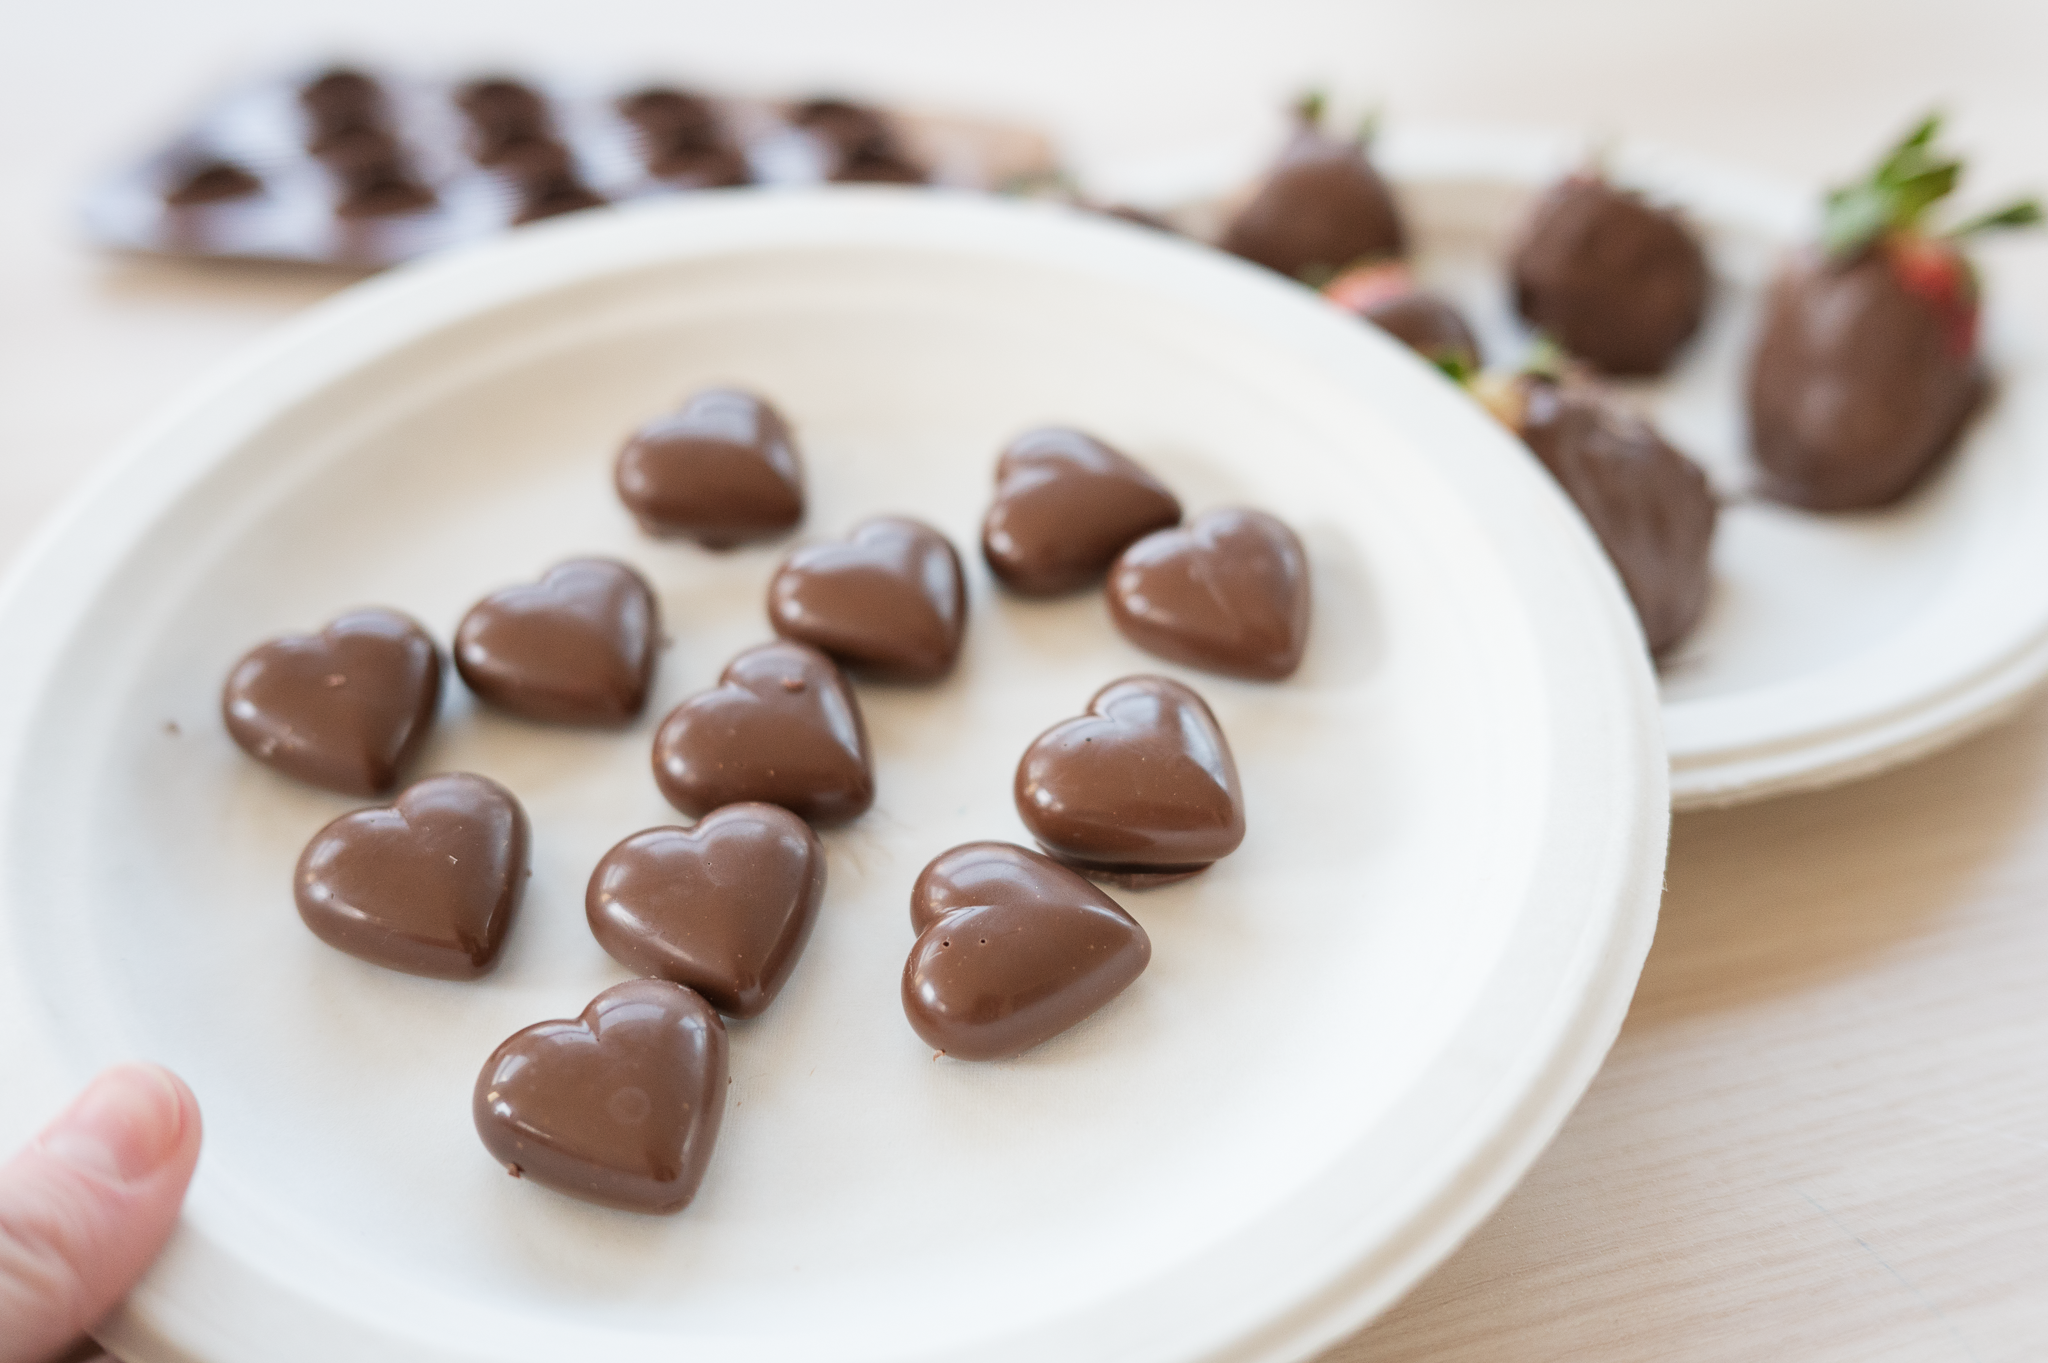 Chocolate hearts with strawberries in the background